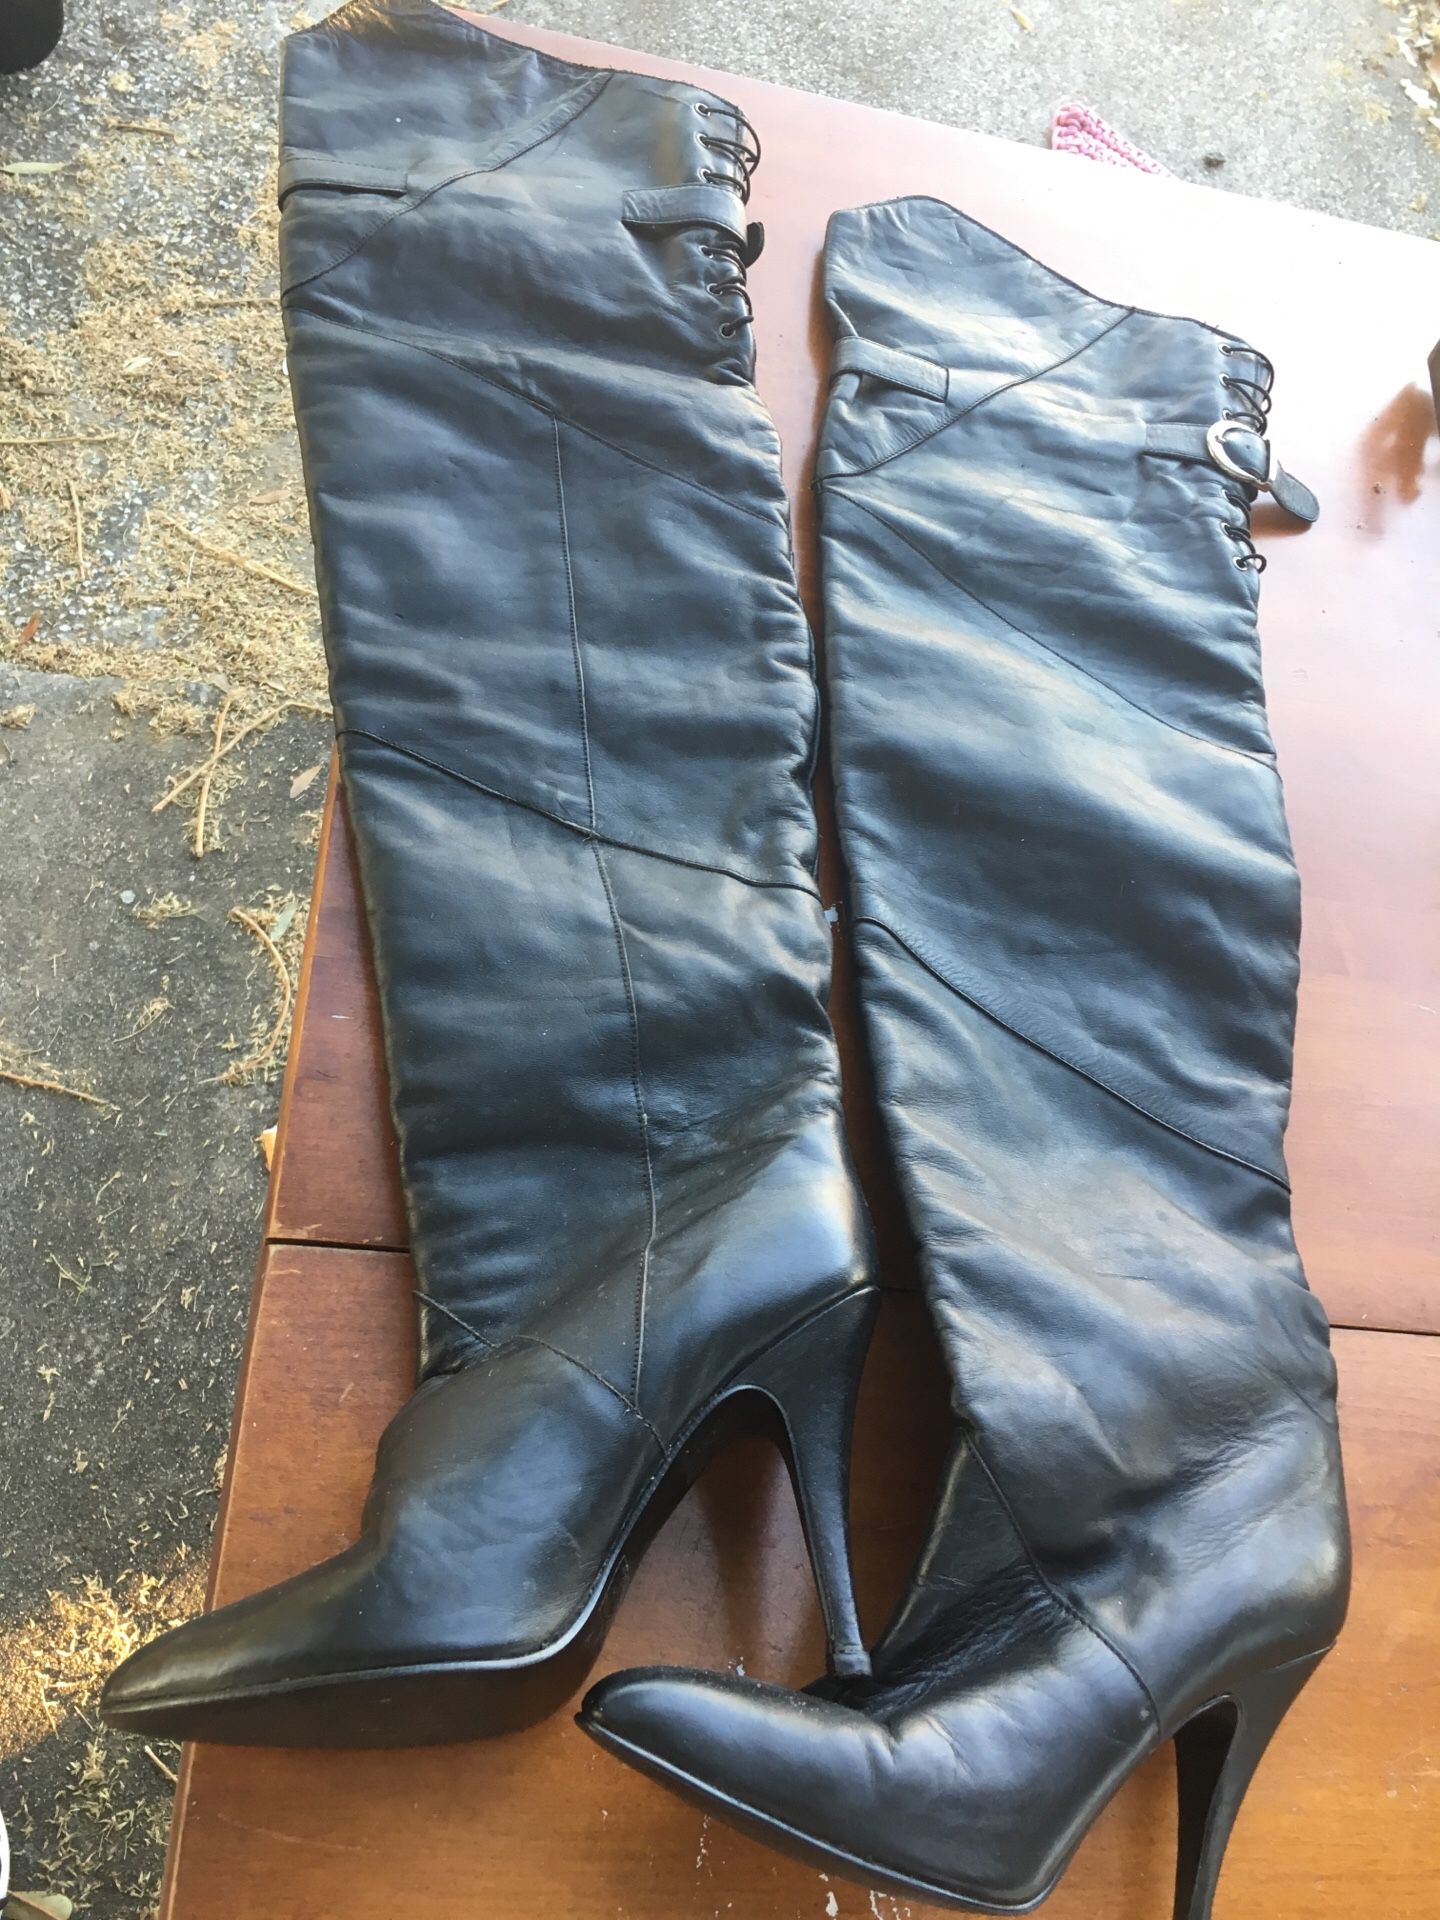 Thigh high boots size 7